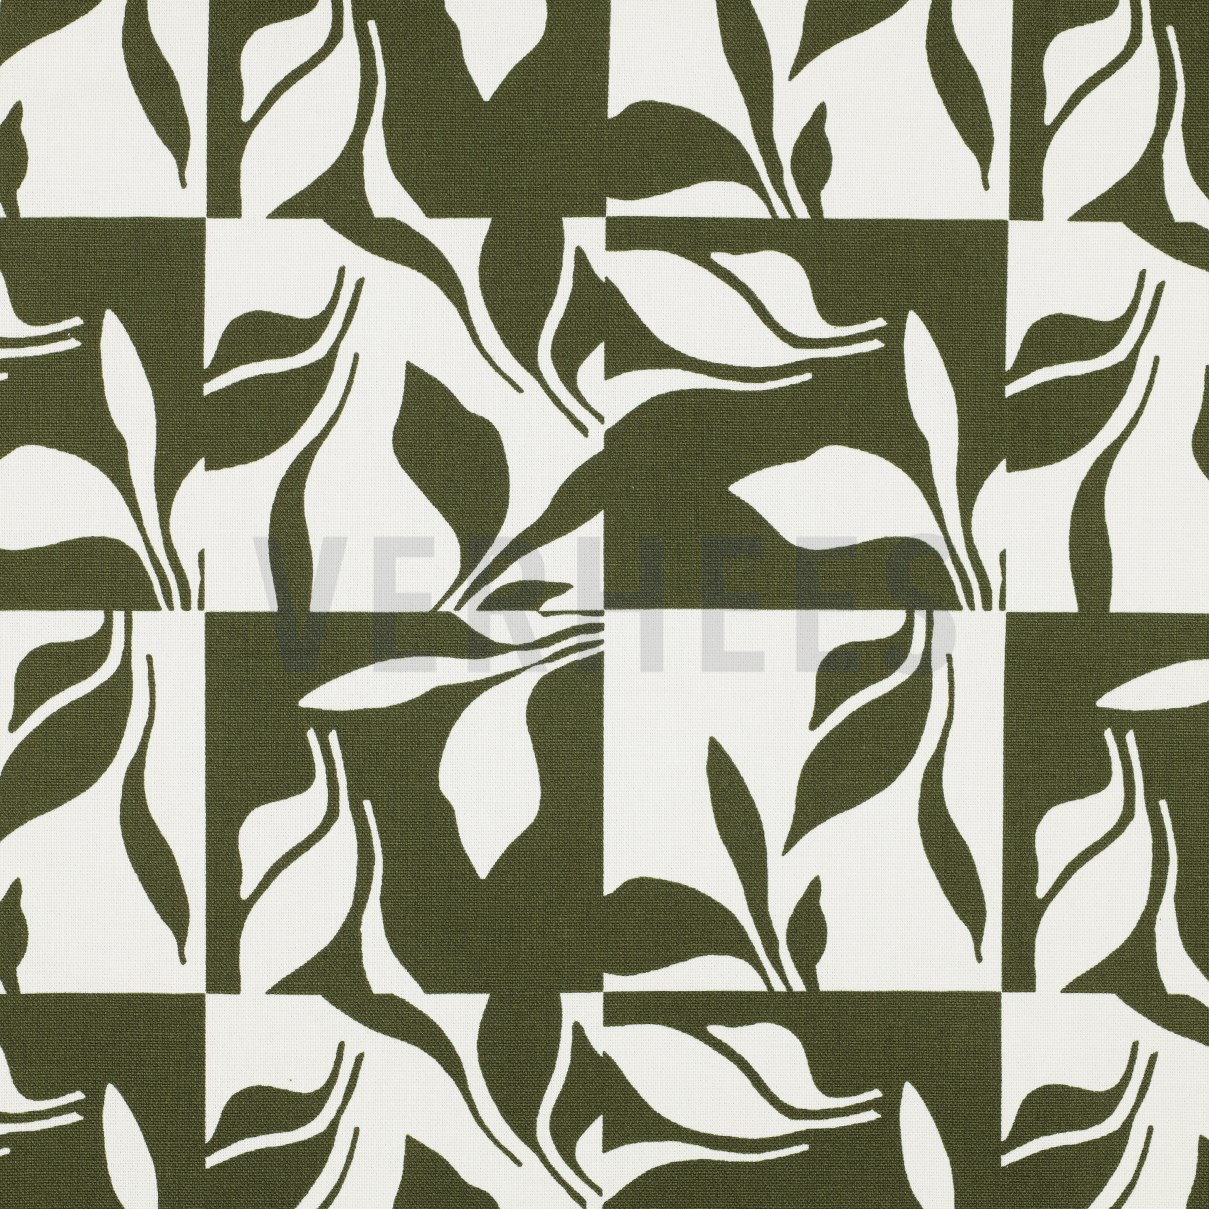 CANVAS ABSTRACT LEAVES FOREST GREEN (high resolution)